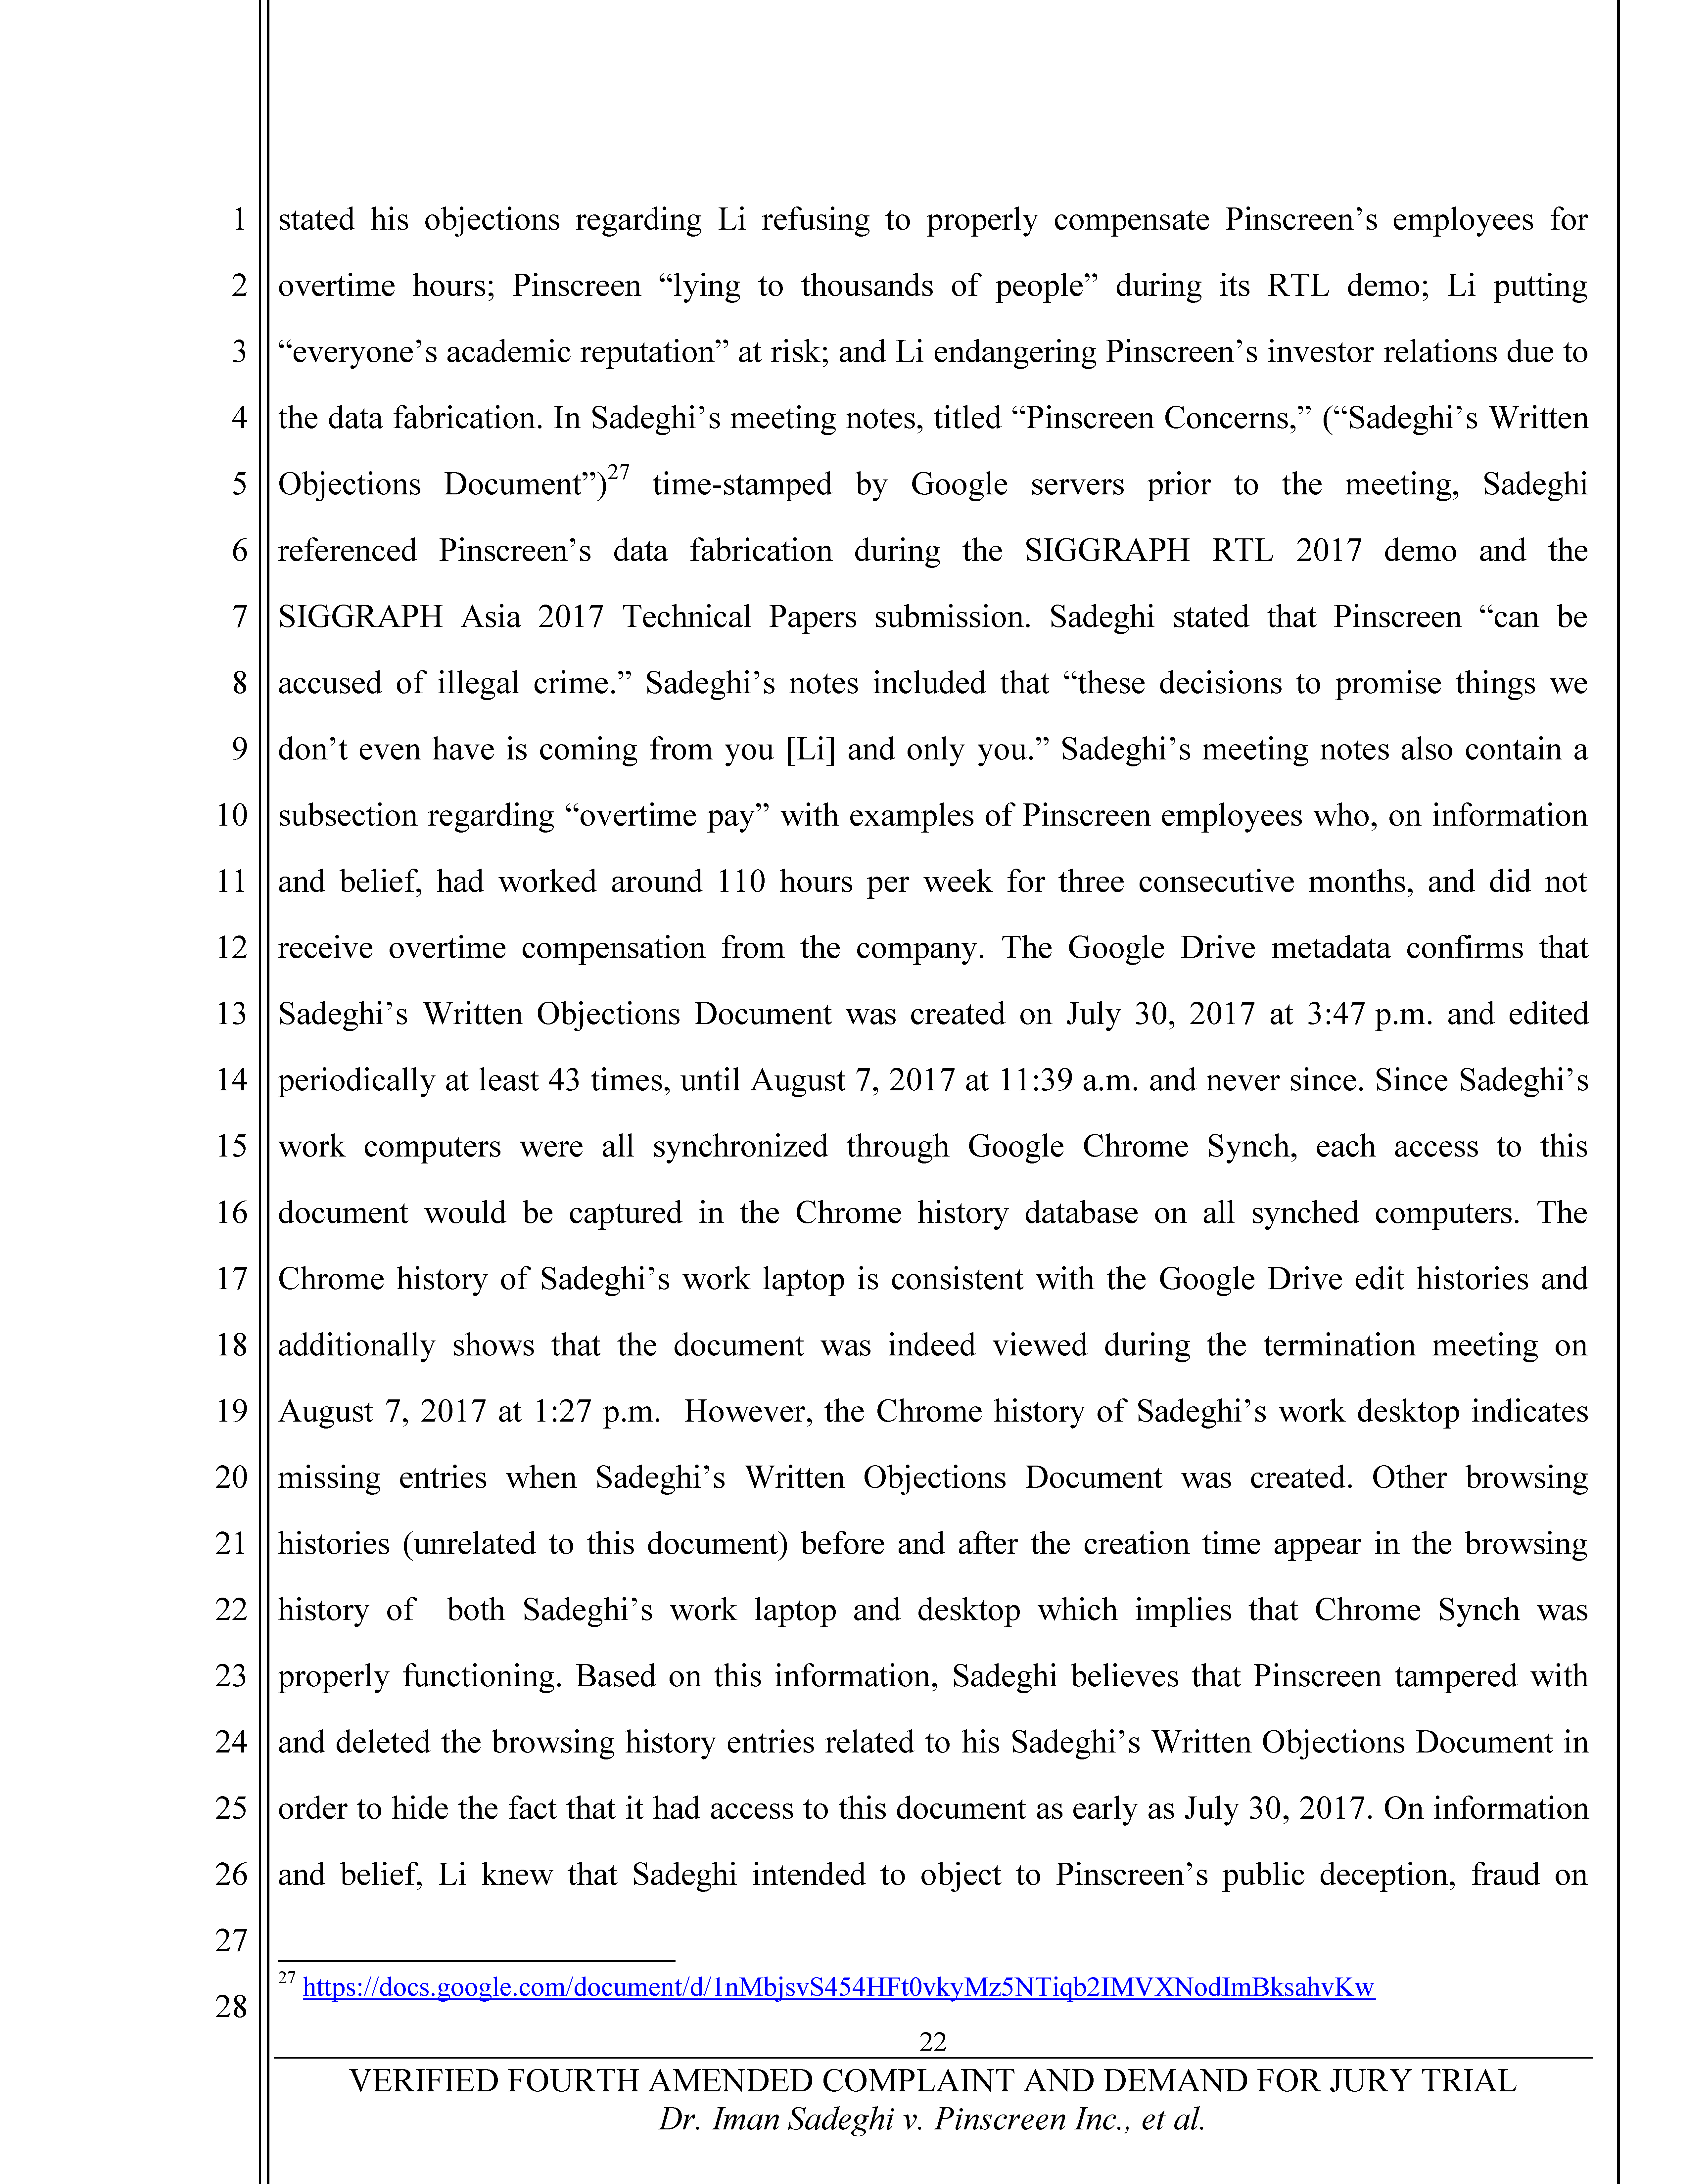 Fourth Amended Complaint (4AC) Page 23